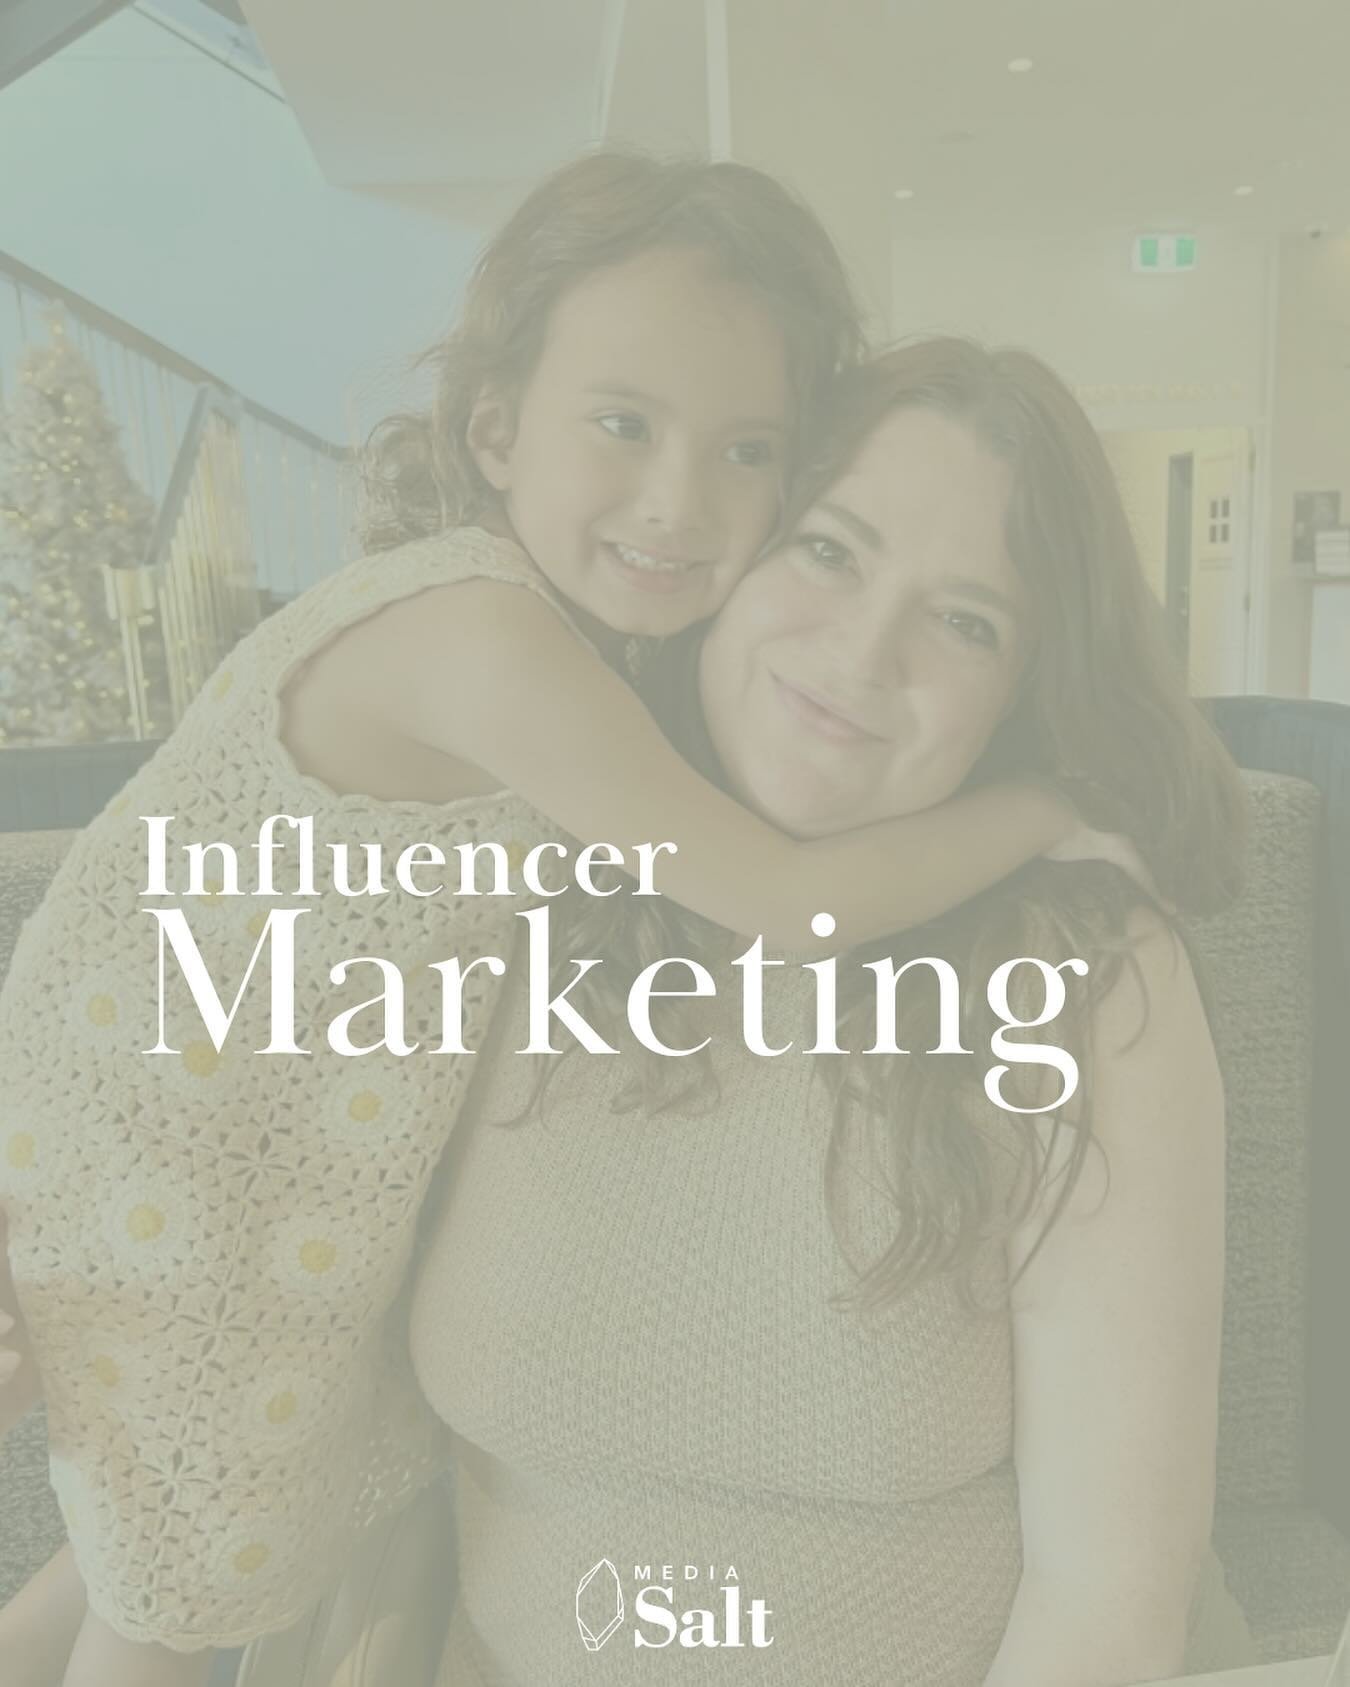 Influencer marketing is all about making it personal. Media planners are catching on, with one in three seeing content engagement as a top goal. And here&rsquo;s the kicker: Influencer-generated content can drum up seven times more engagement compare